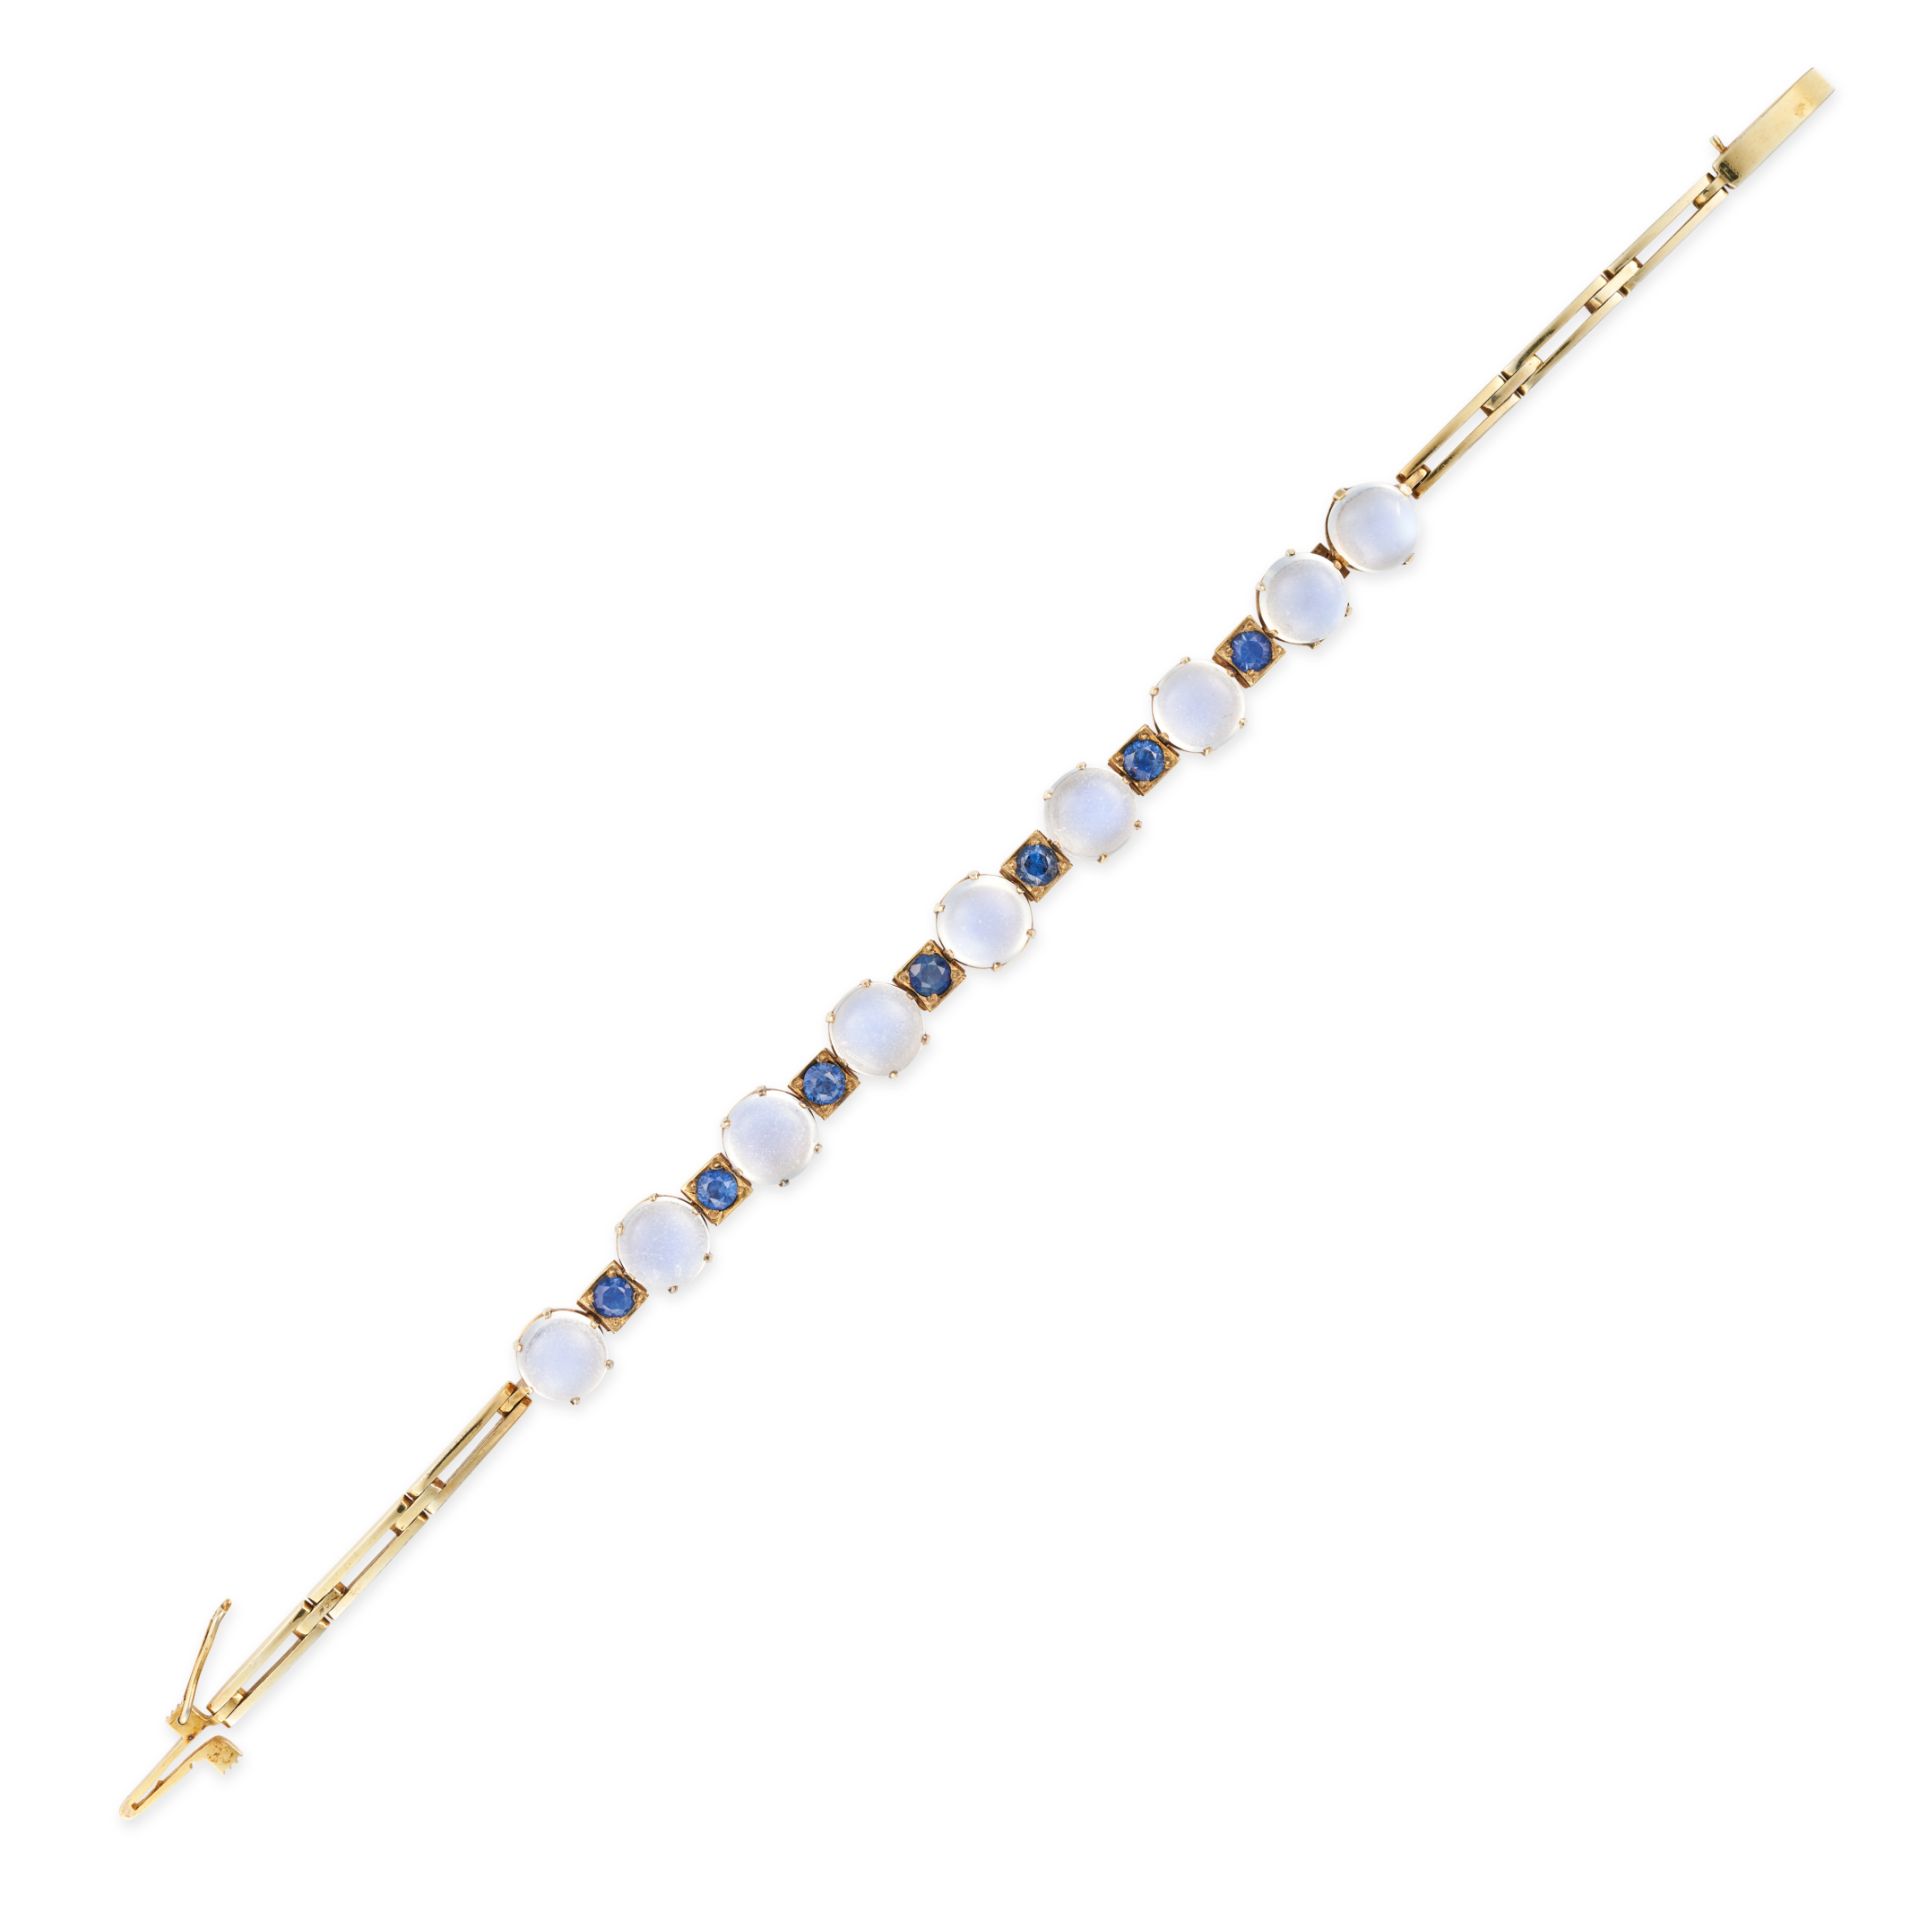 NO RESERVE - A MOONSTONE AND SAPPHIRE BRACELET comprising a row of alternating round cabochon moo...